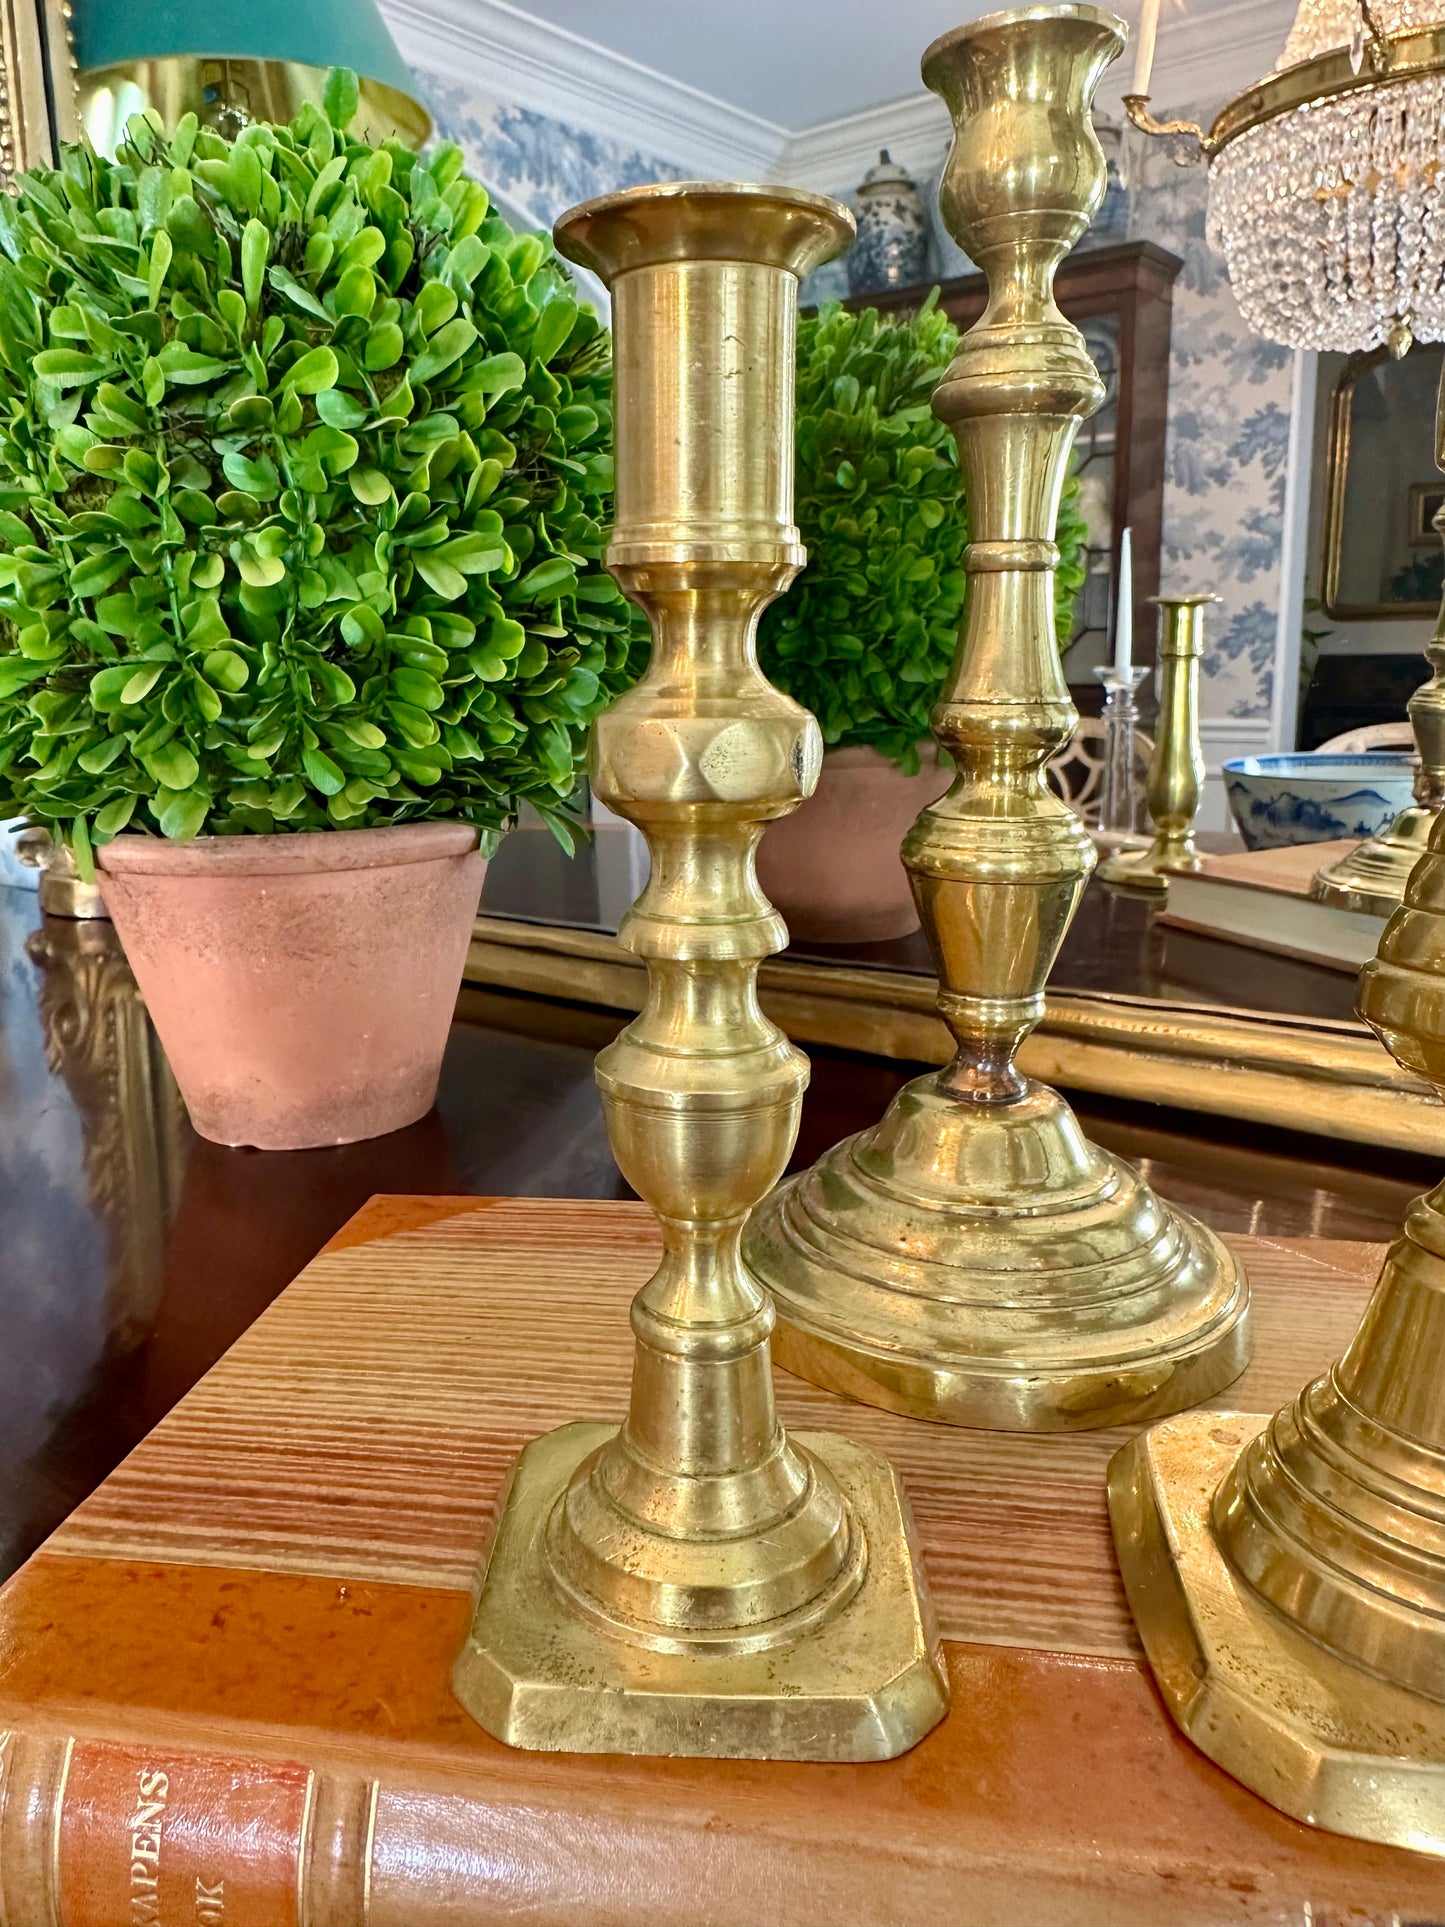 Set of 4 19thc Antique Brass Candle Sticks Holders Variety Sizes